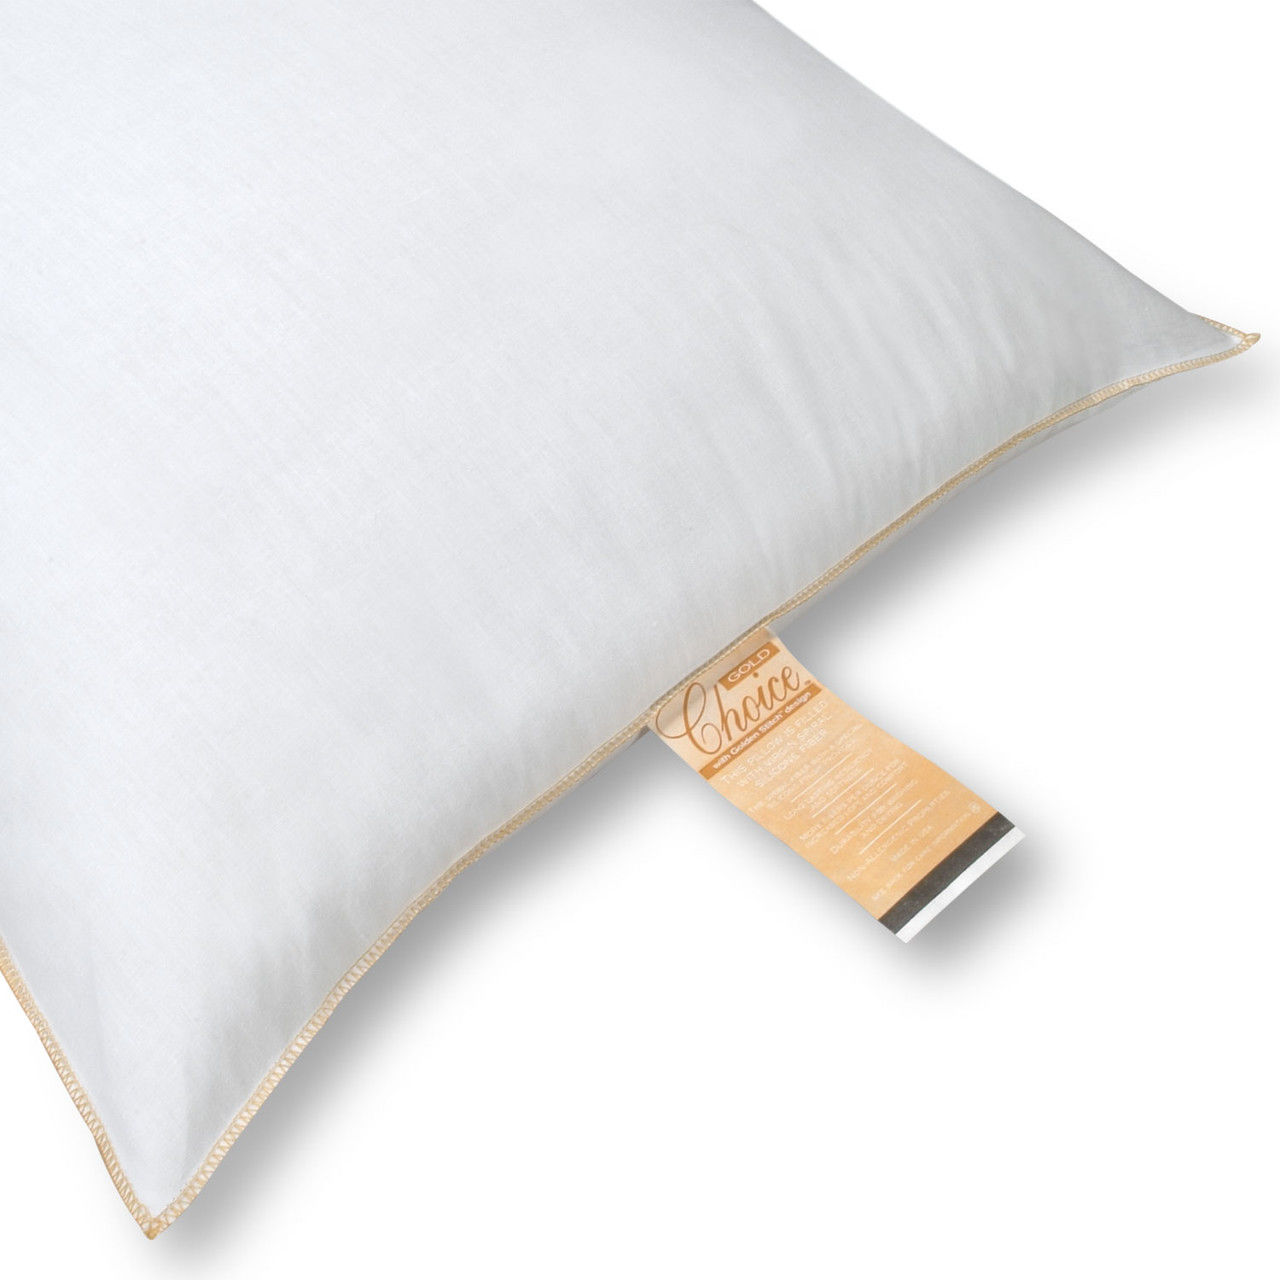 What are the available sizes for gold choice pillows?